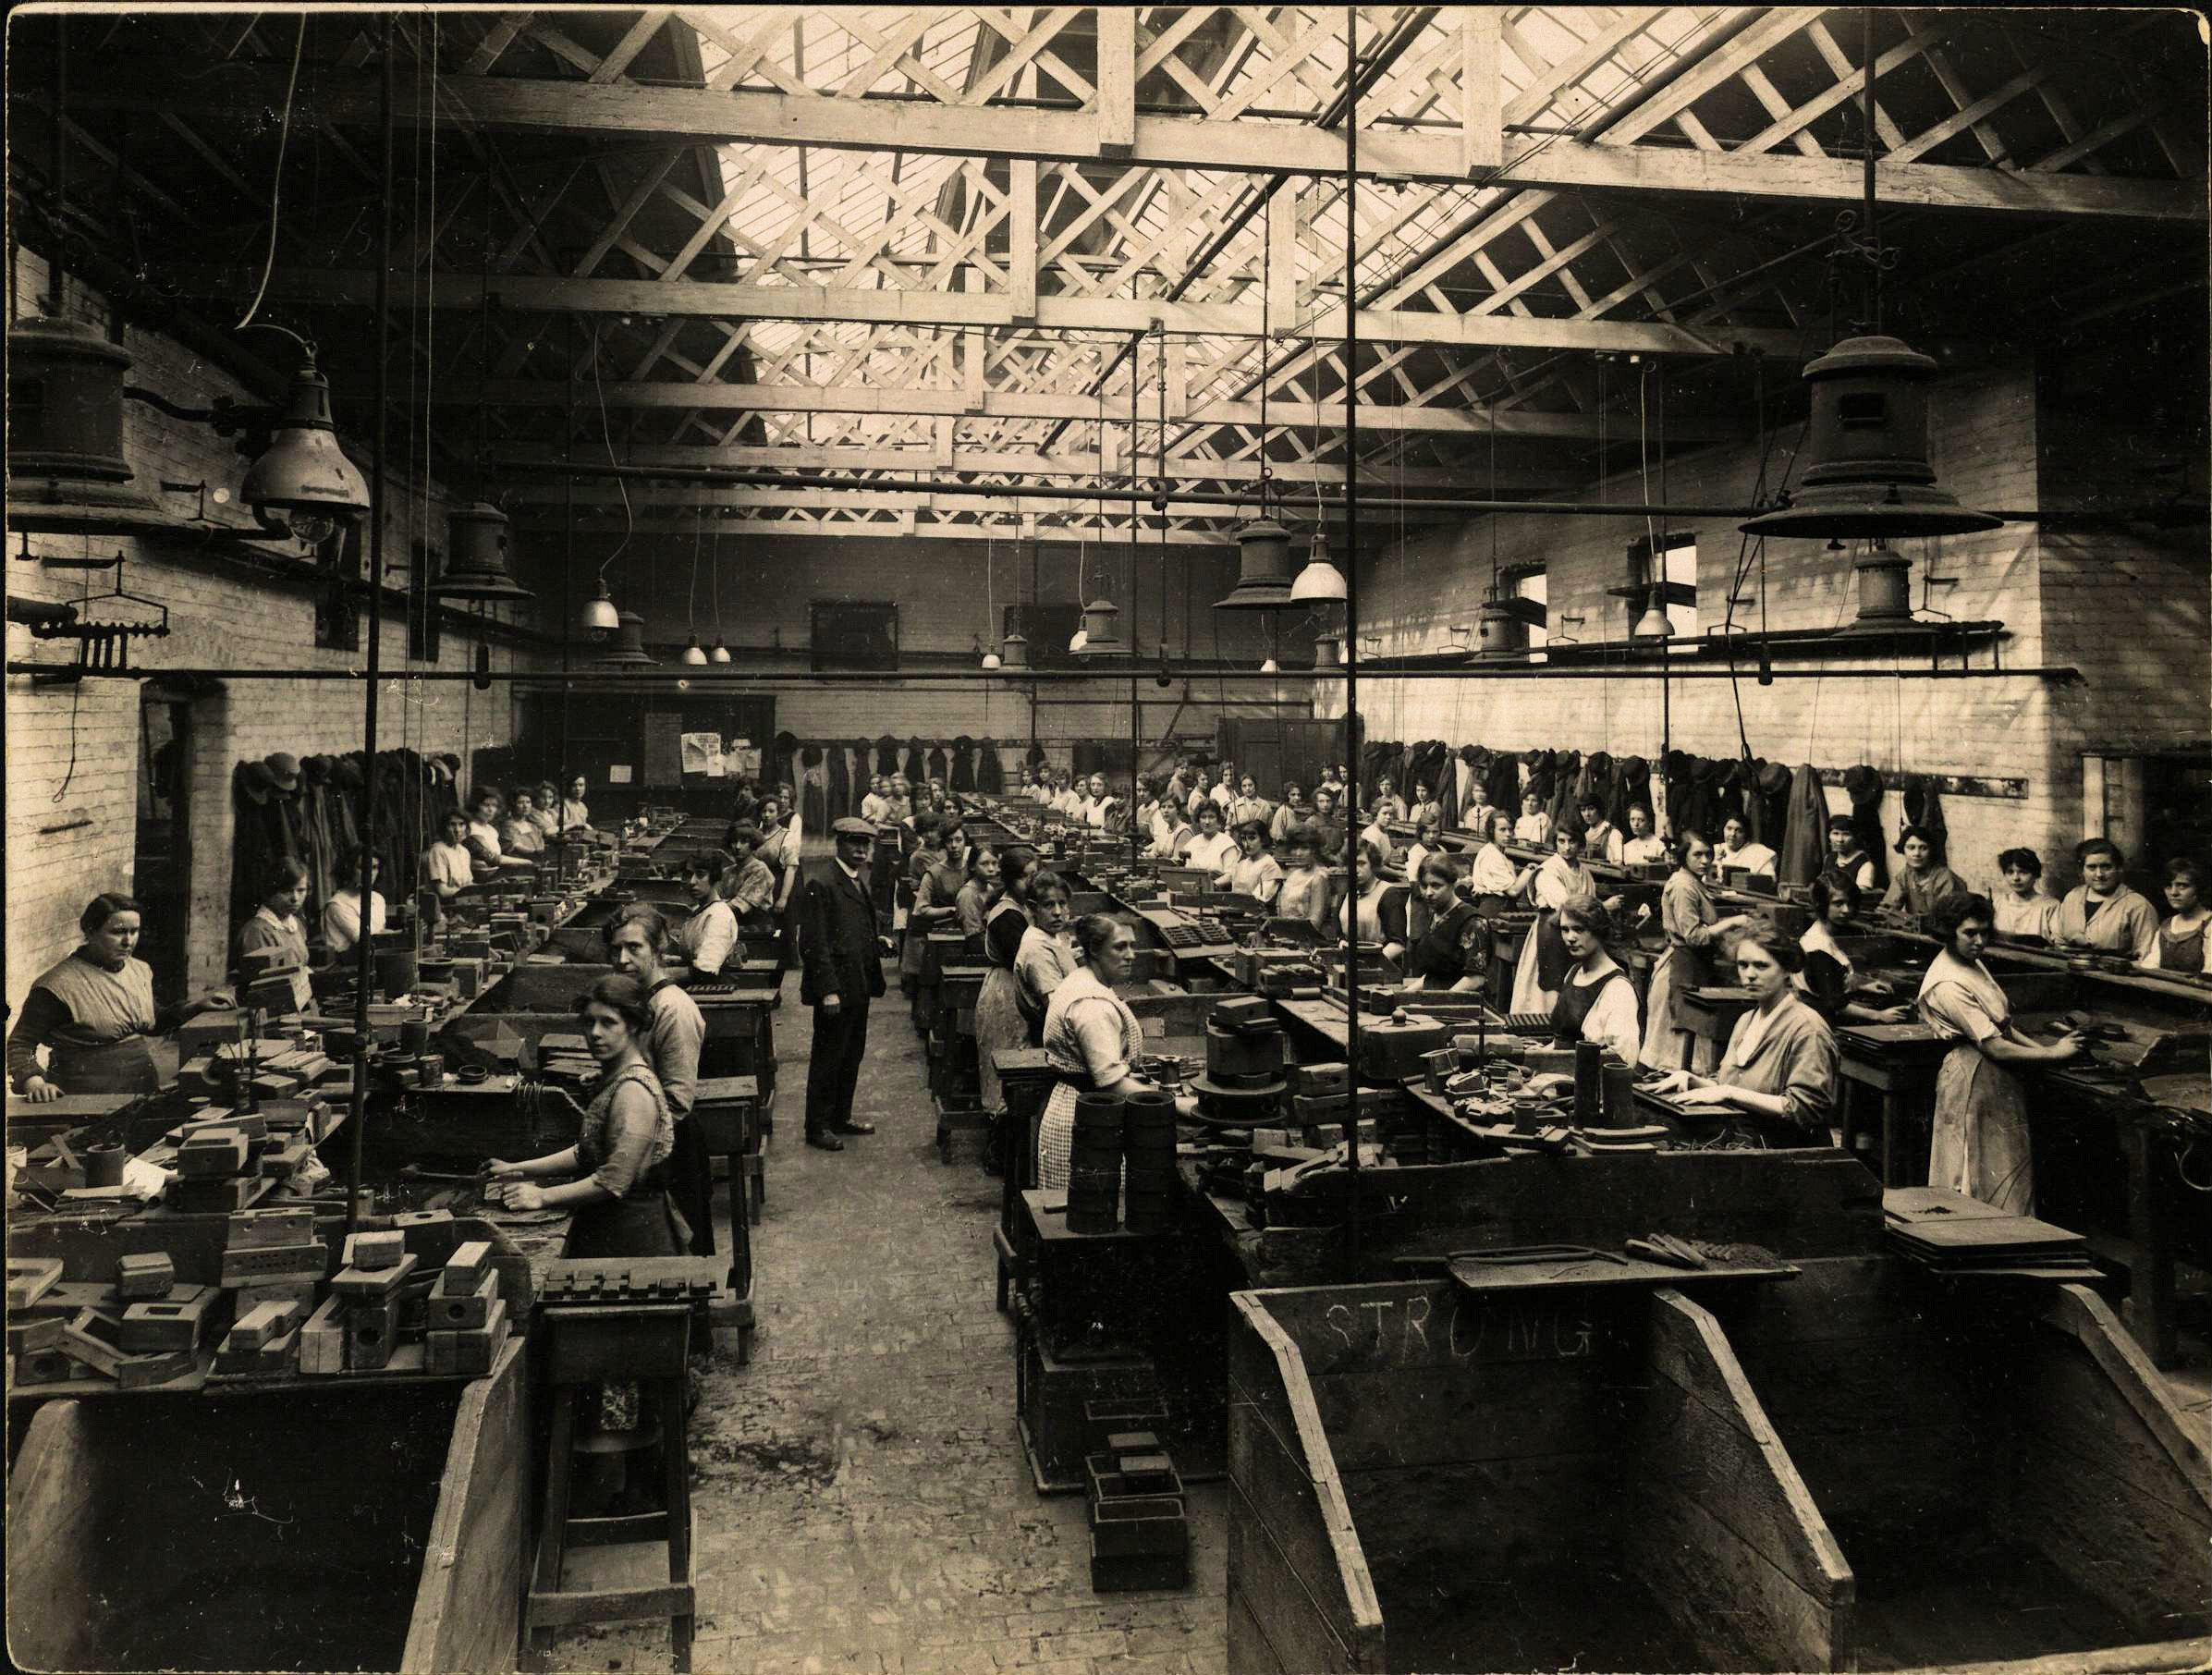 Working Women at Ley’s Malleable Castings Company Ltd, Circa 1920